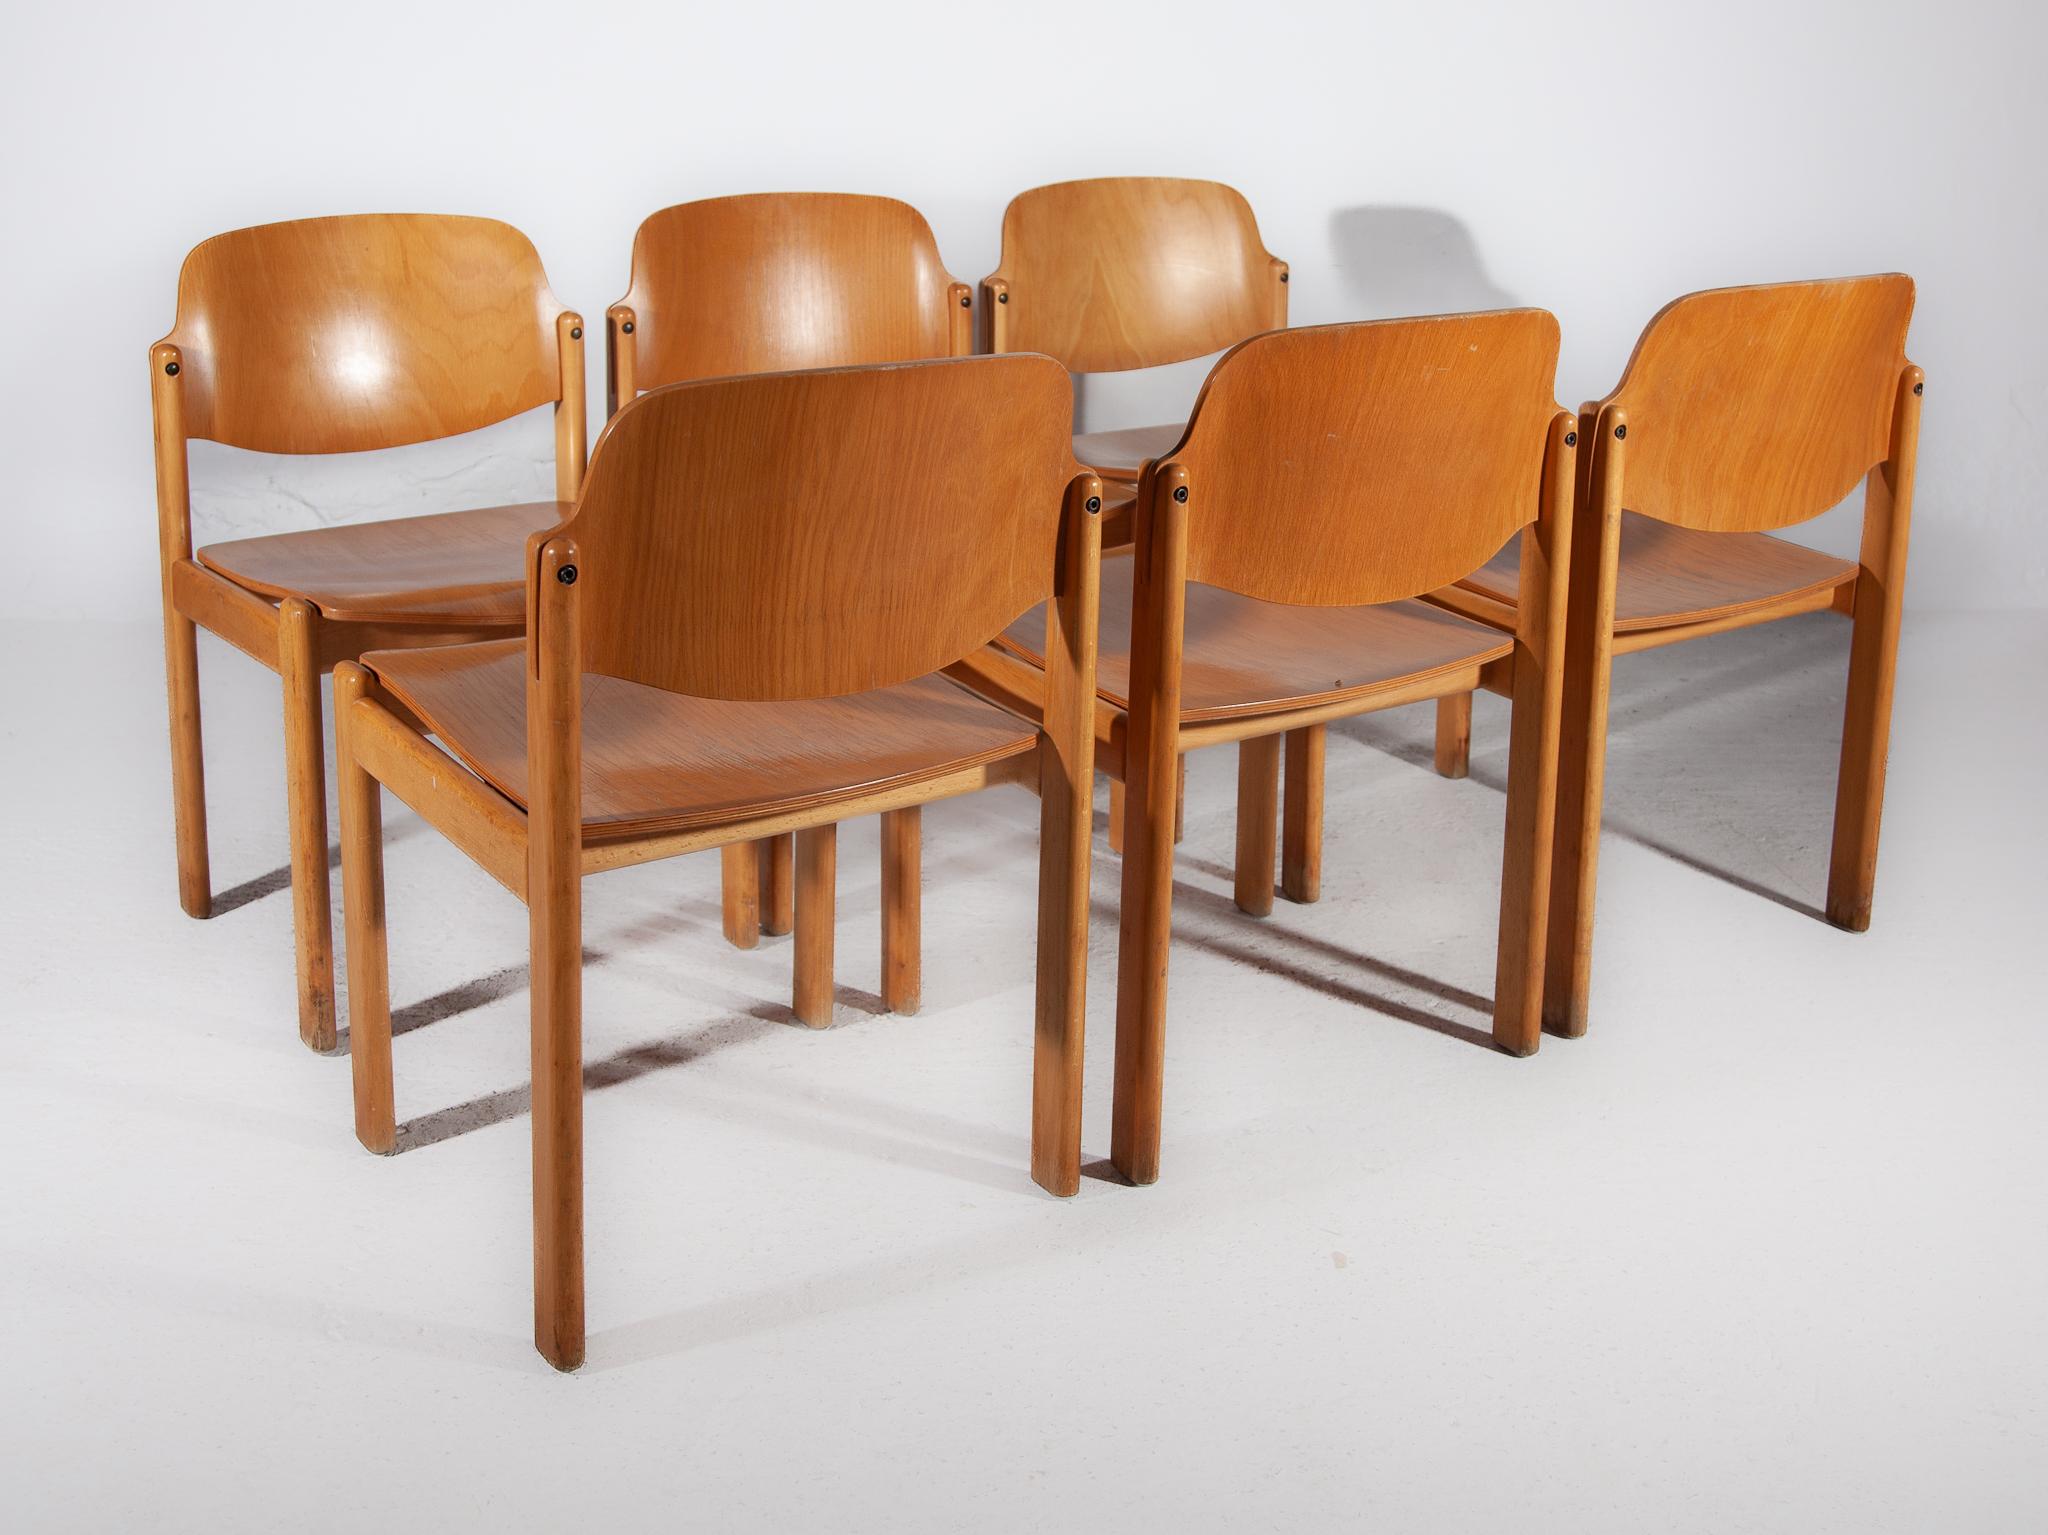 Set of Twelve Beech Wood Dining Chairs, Germany 1970s For Sale 8